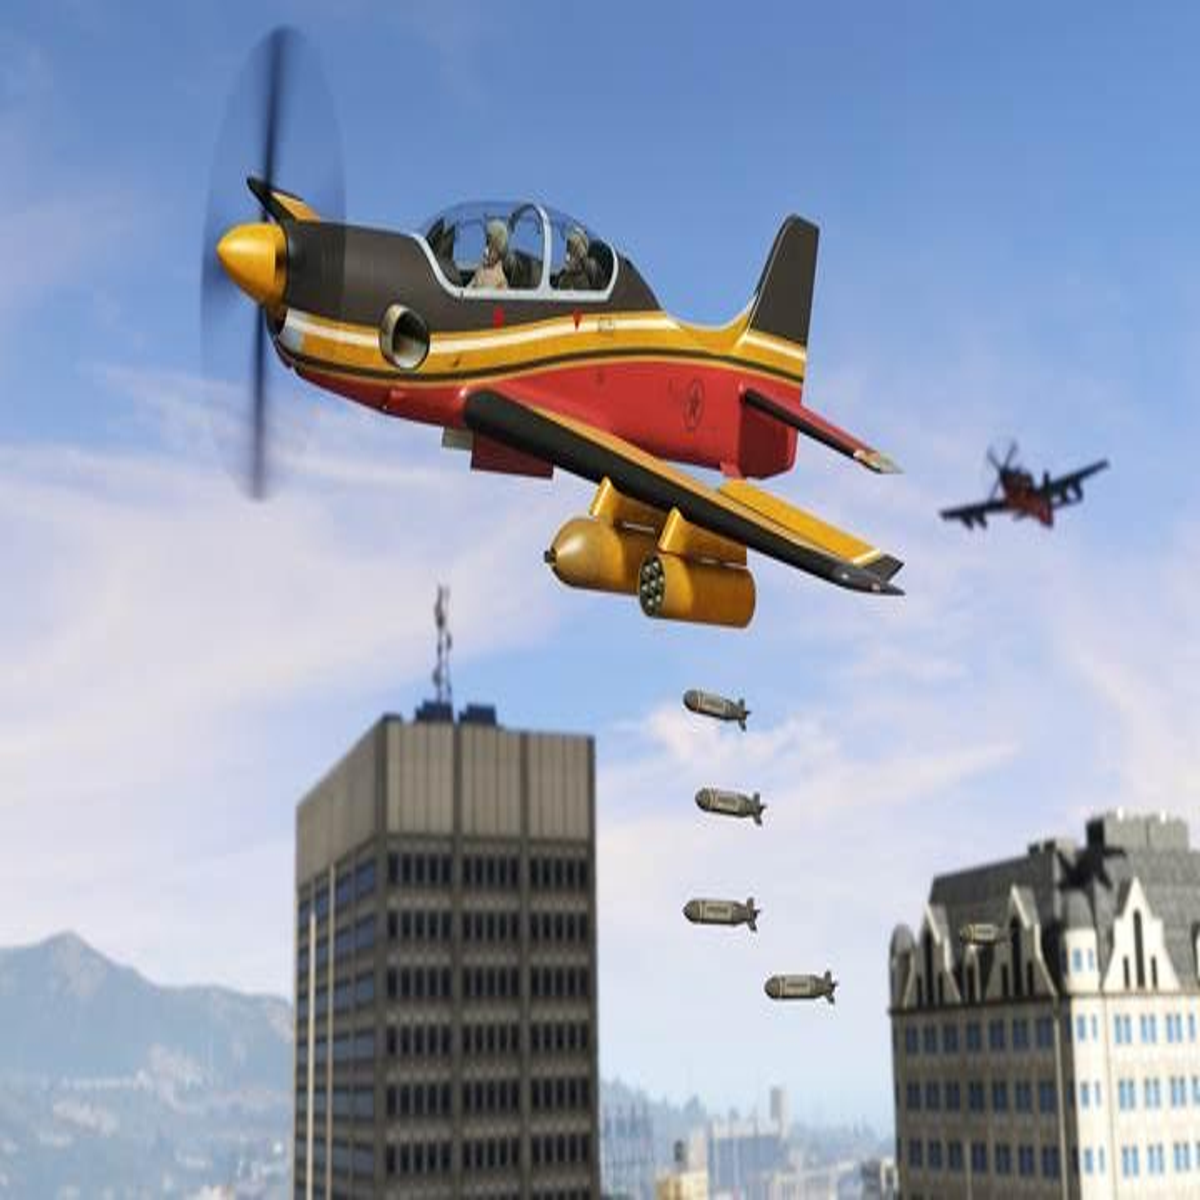 Invite-only Cargo runs now possible in GTA Online empty lobbies - how to  set them up 